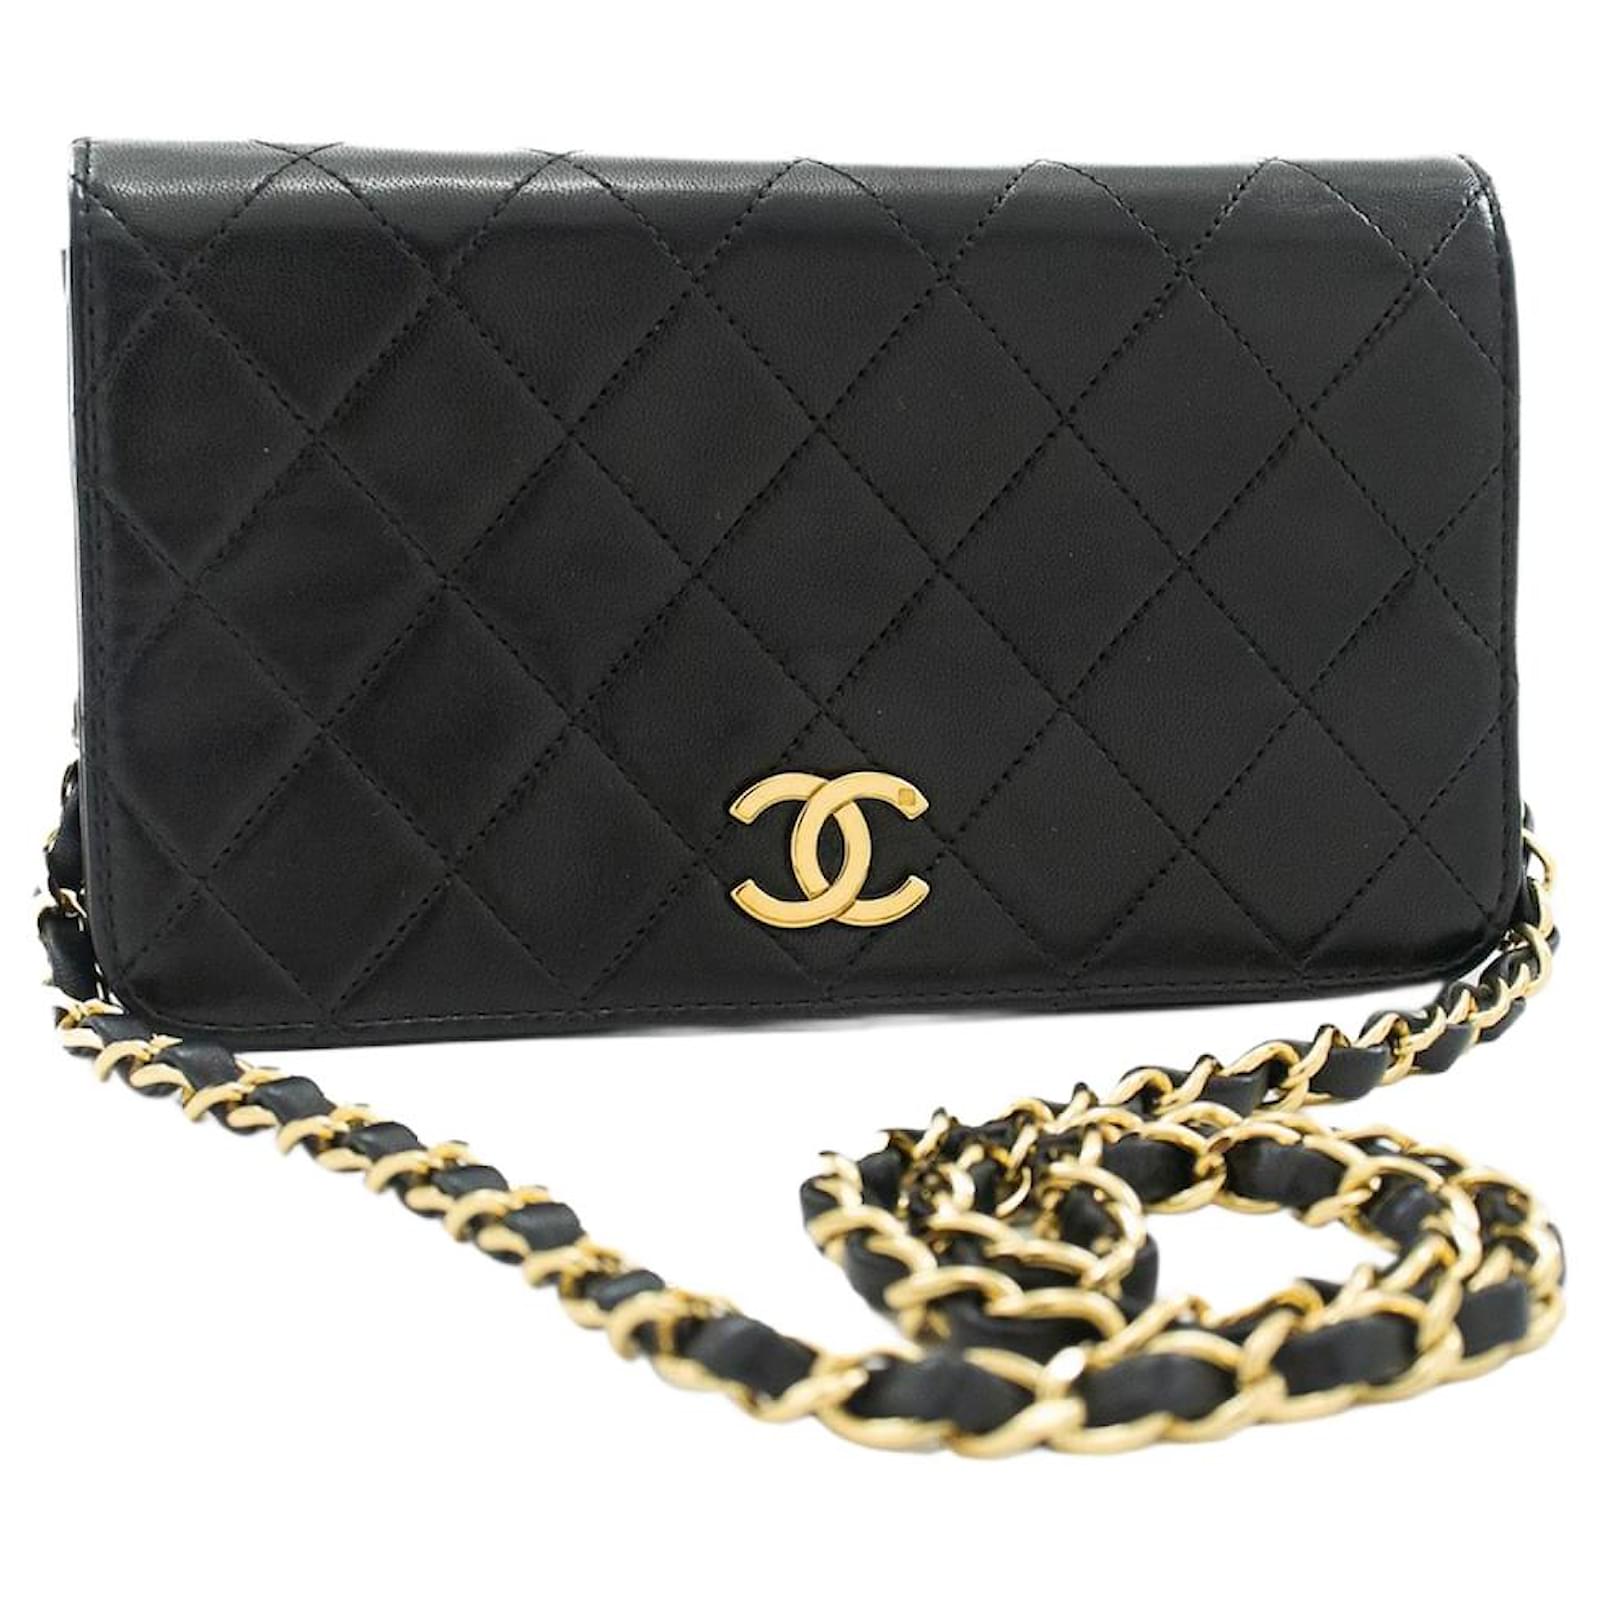 CHANEL Pre-Owned 2002 CC diamond-quilted shoulder bag - Black